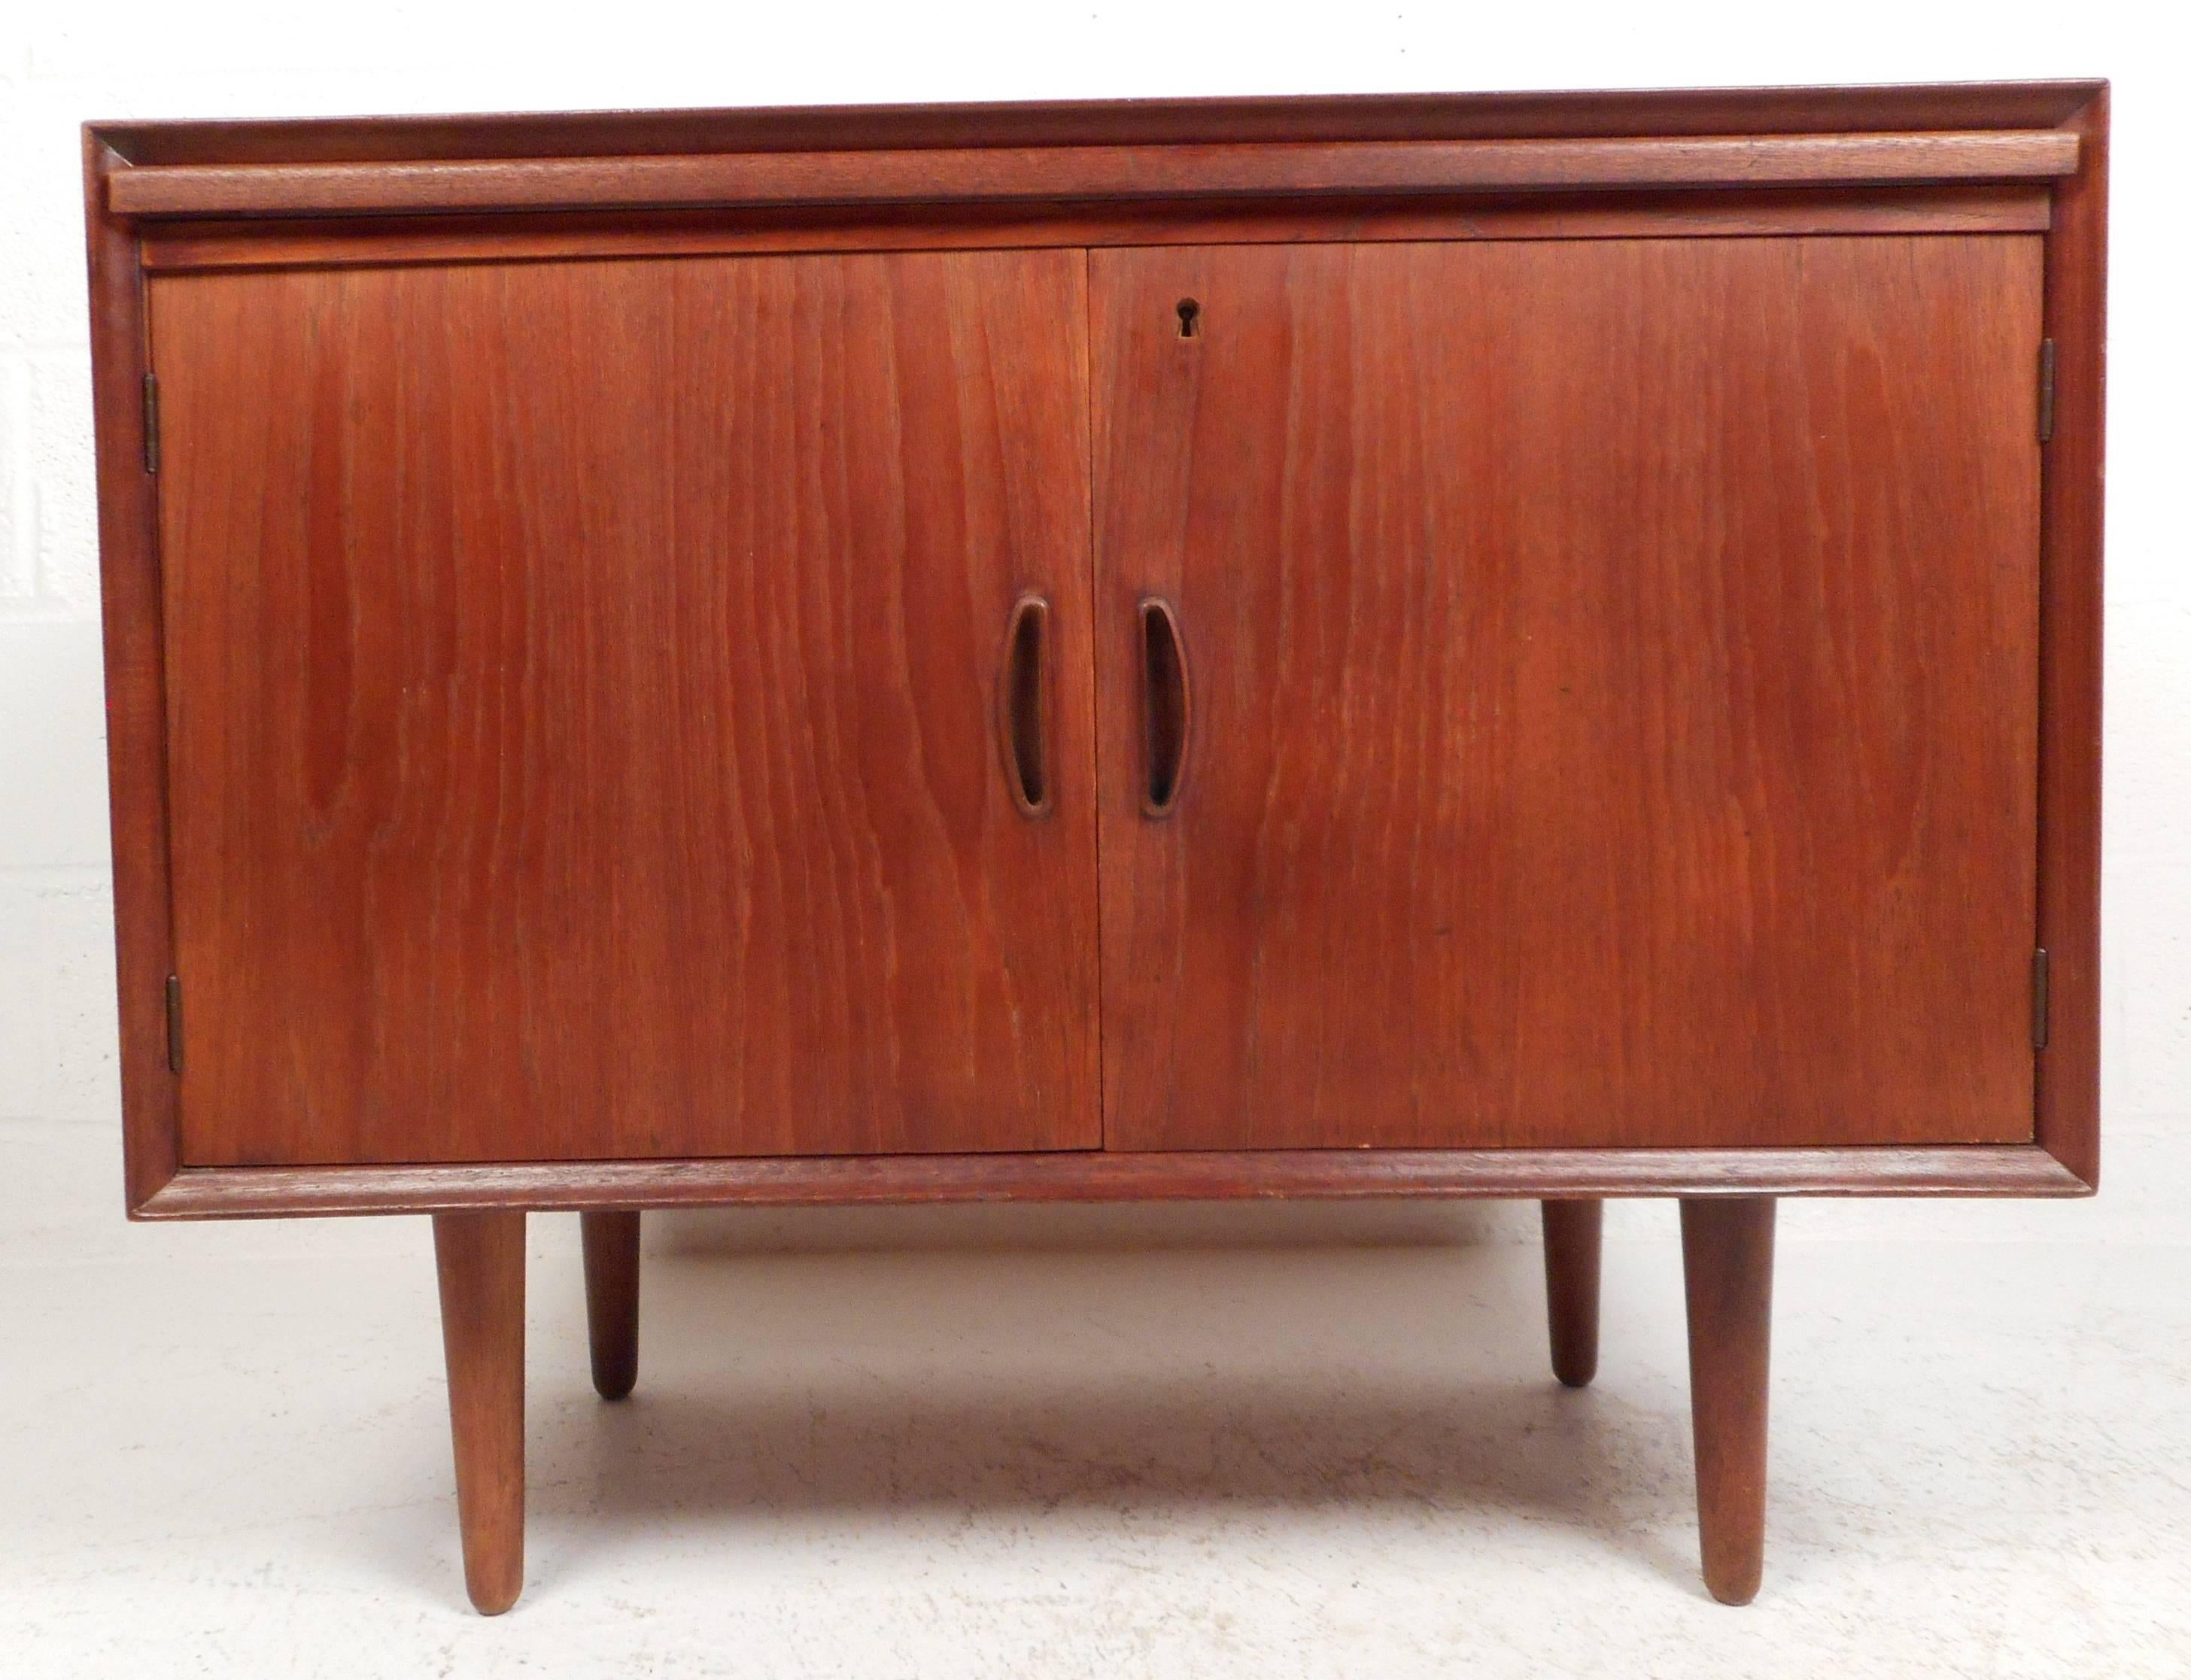 Gorgeous vintage modern small two-door server features unique carved pulls and a pullout Formica top tray. Sleek design with a vintage teak finish and four tapered legs. Stamped 